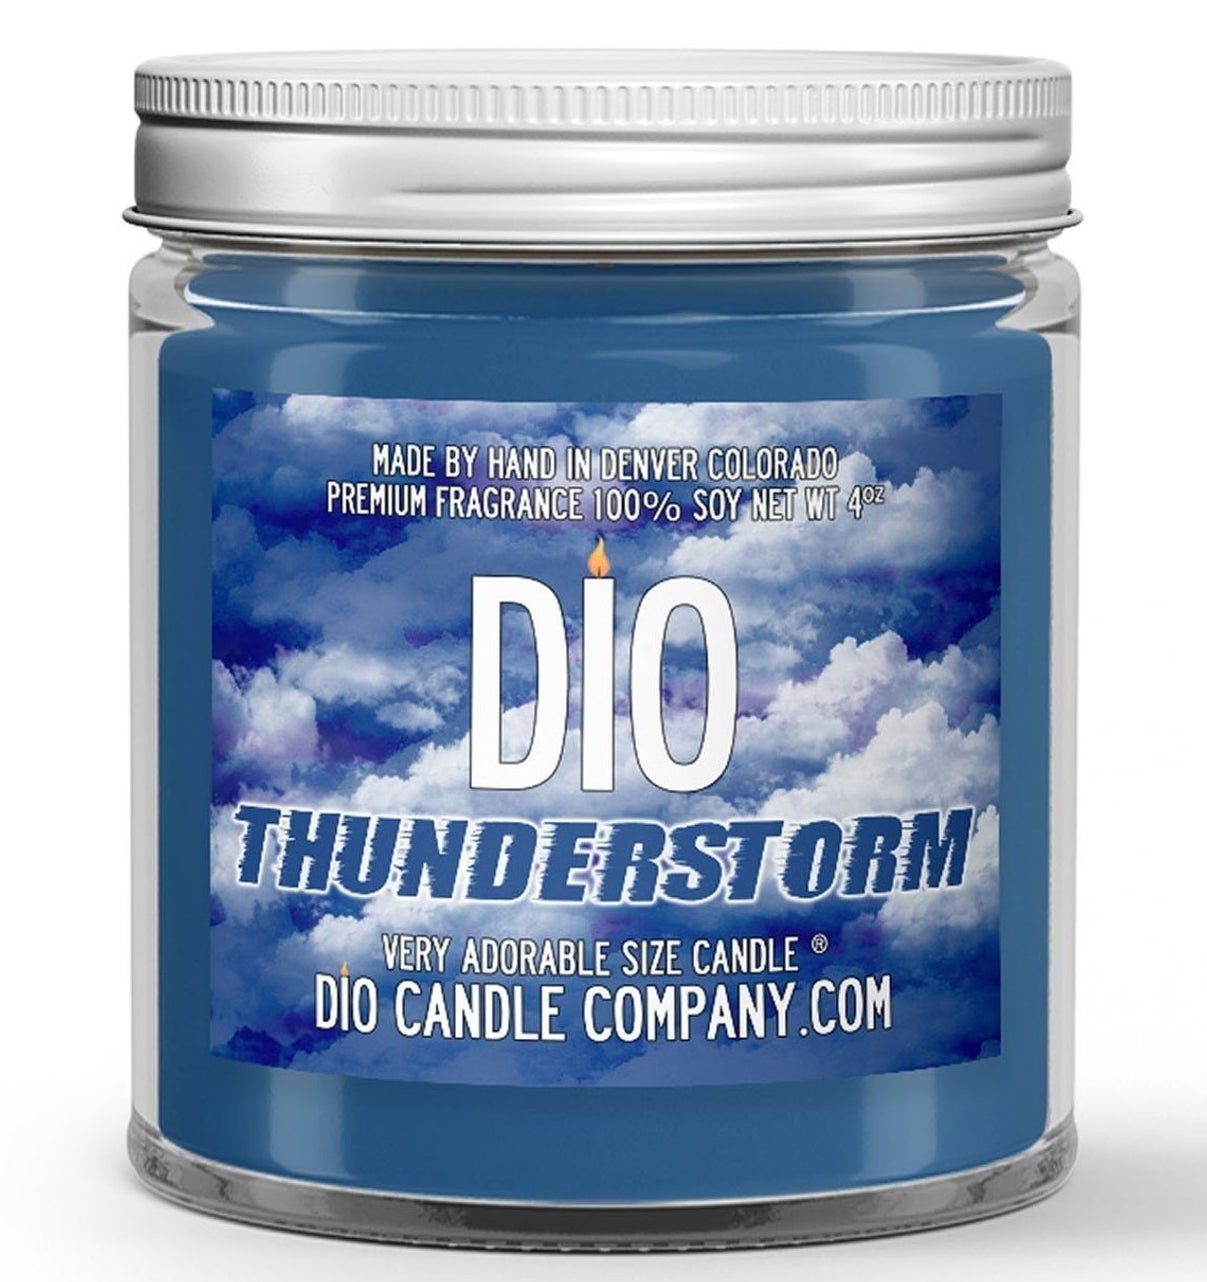 The thunderstorm candle